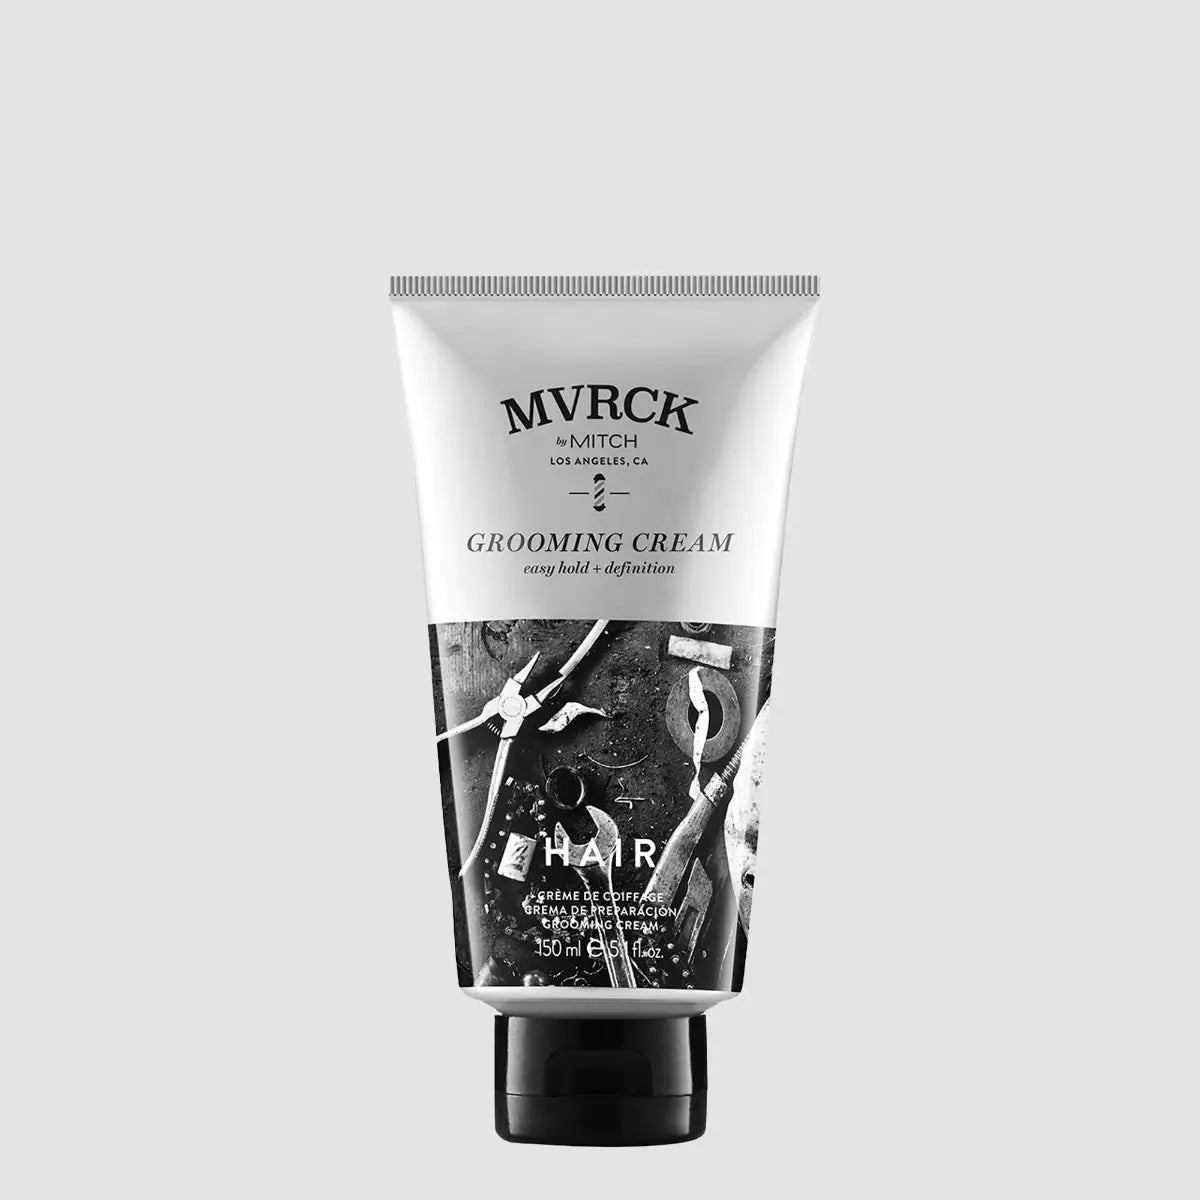 MVRCK by Mitch - Grooming Cream